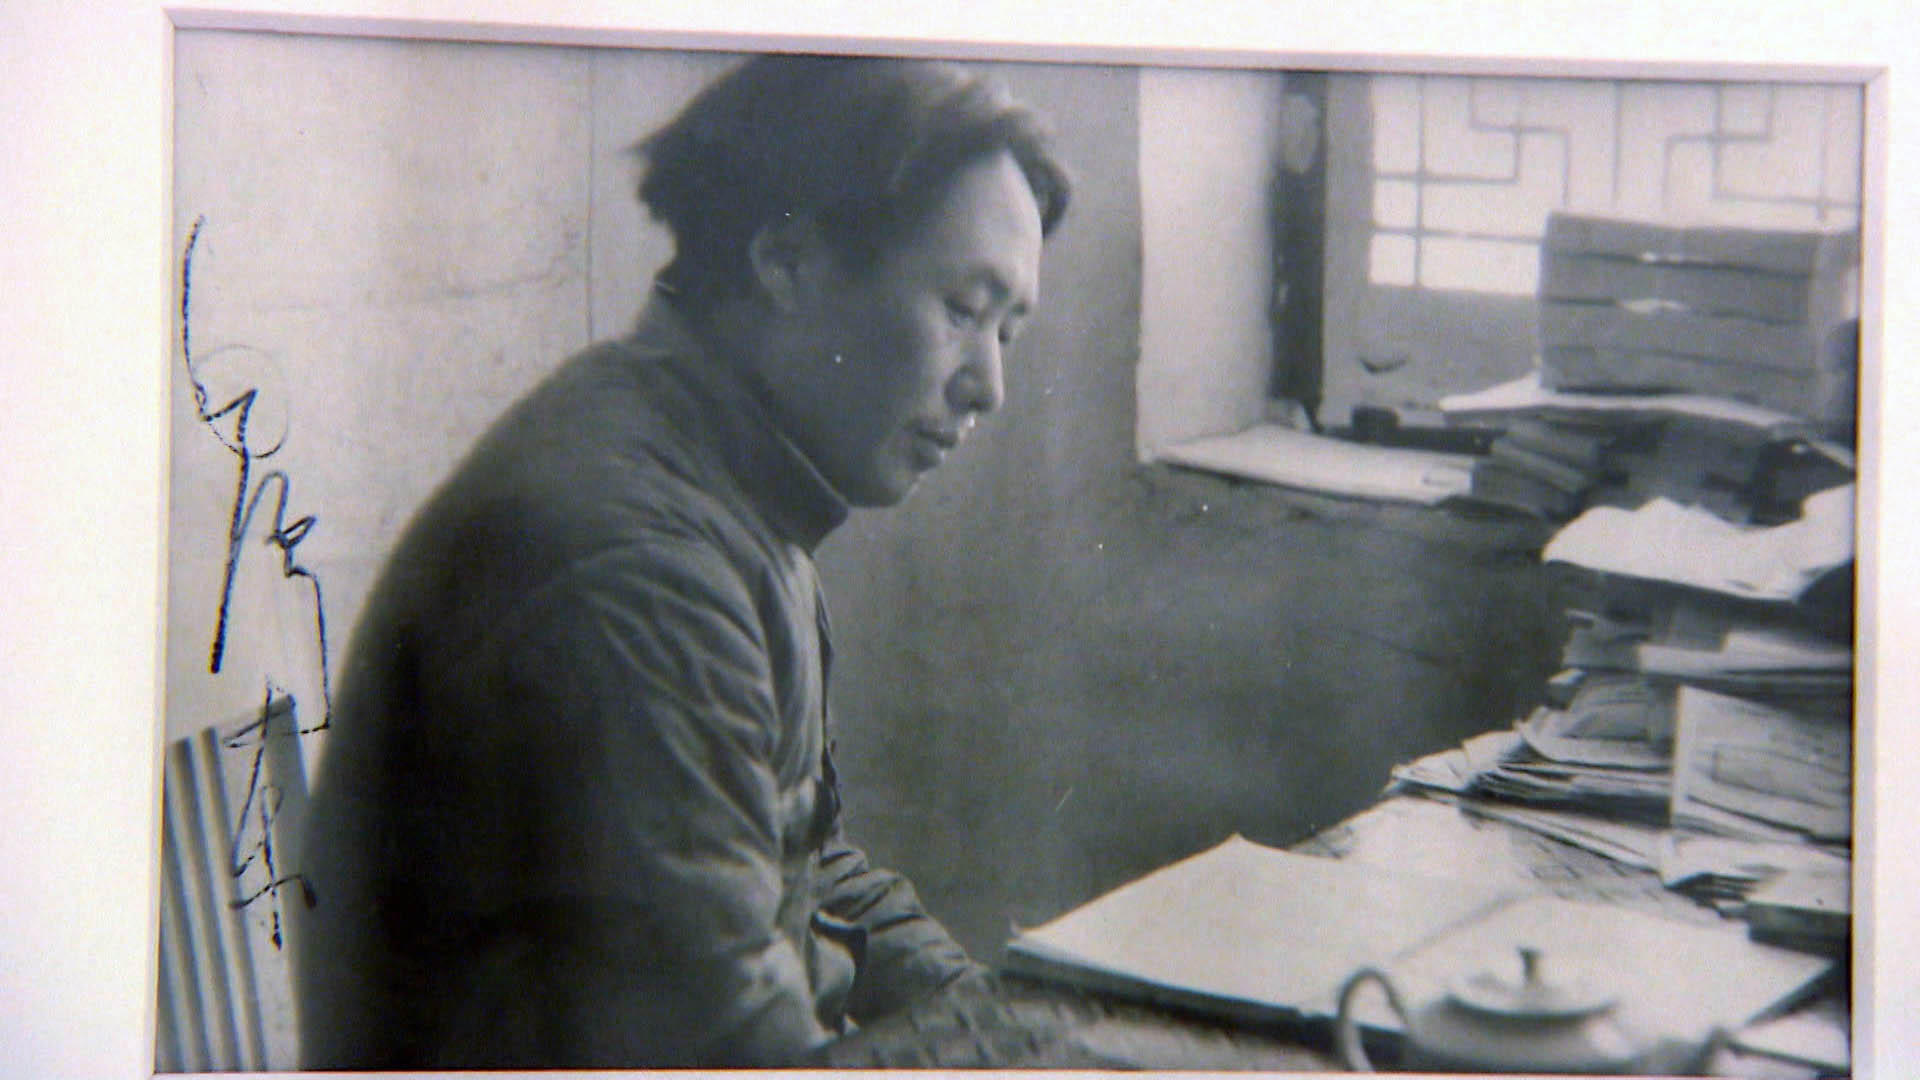 Photo of Mao Zedong sitting at desk